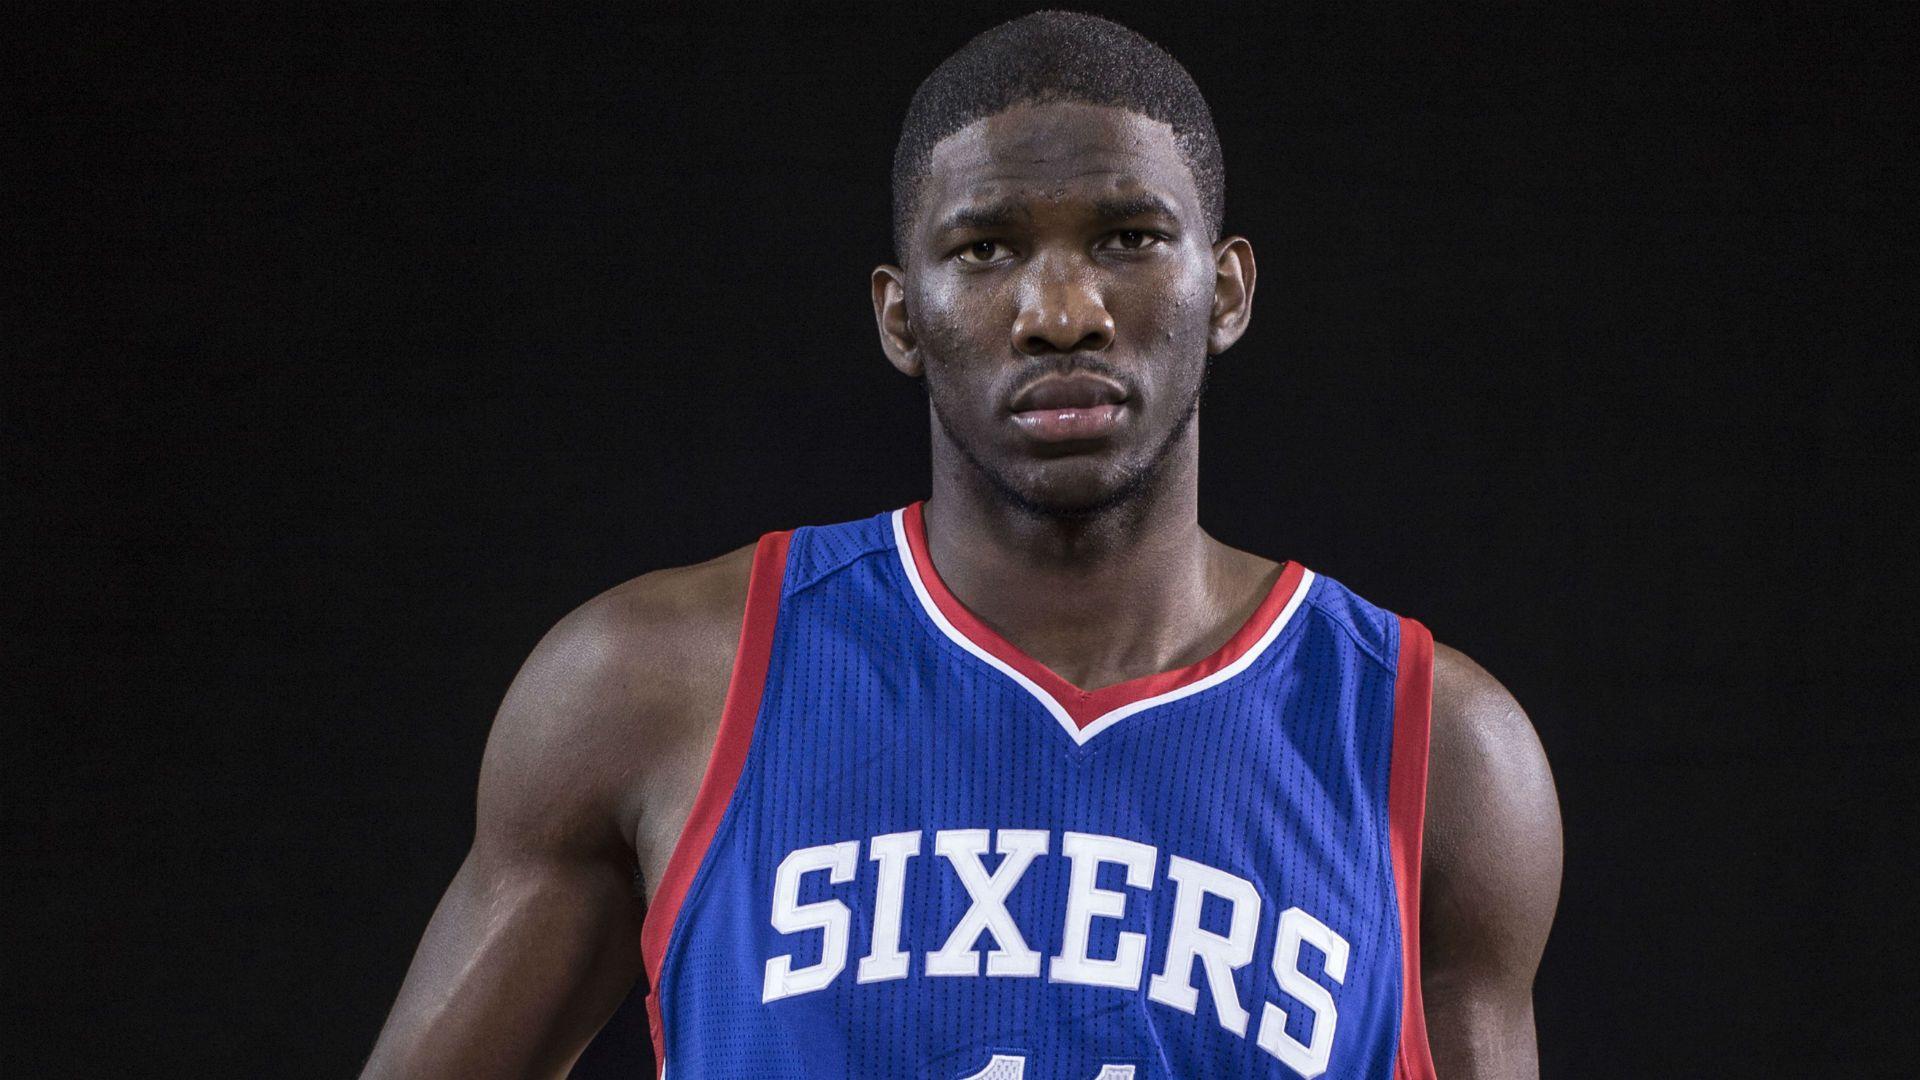 Joel Embiid suffers setback, could alter Sixers draft plans. NBA